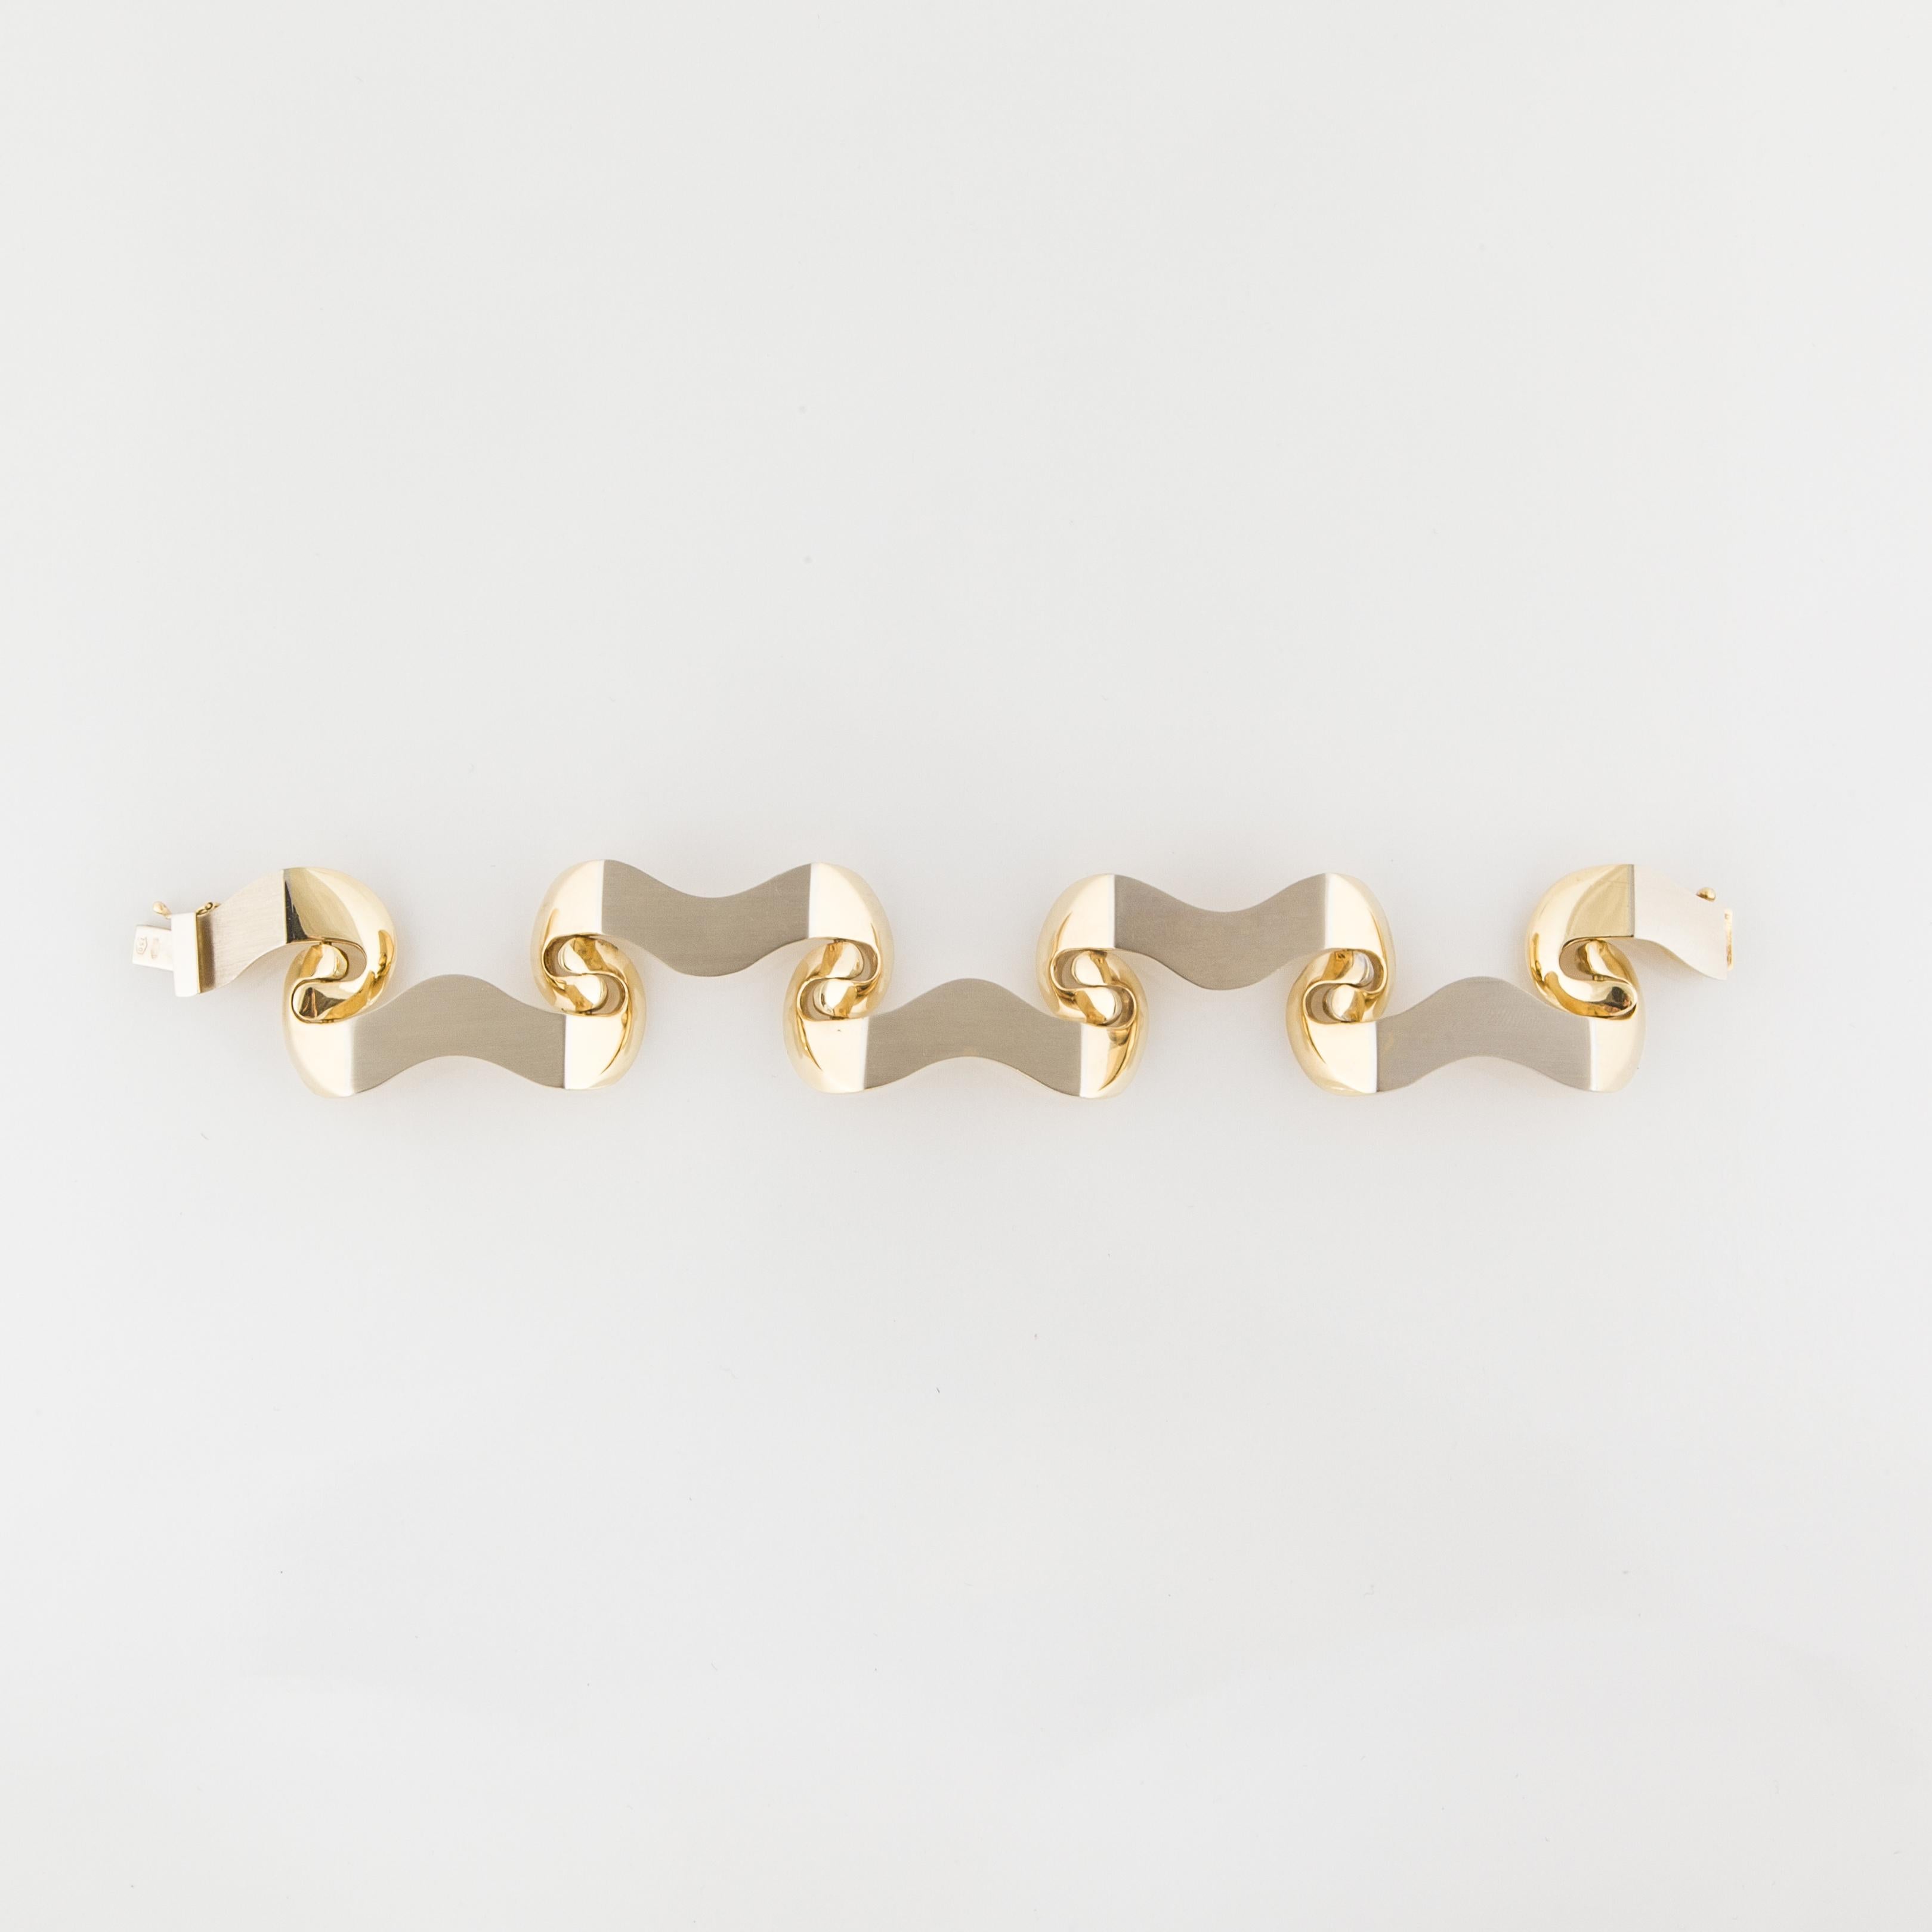 18K two-tone gold bracelet features both brushed and high polished finishes.  When the bracelet is fastened, it wears like a bangle.  It is a unique design, fine quality.  The bracelet measures 7 3/4 inches long and 1 1/8 inches wide.  Italian.